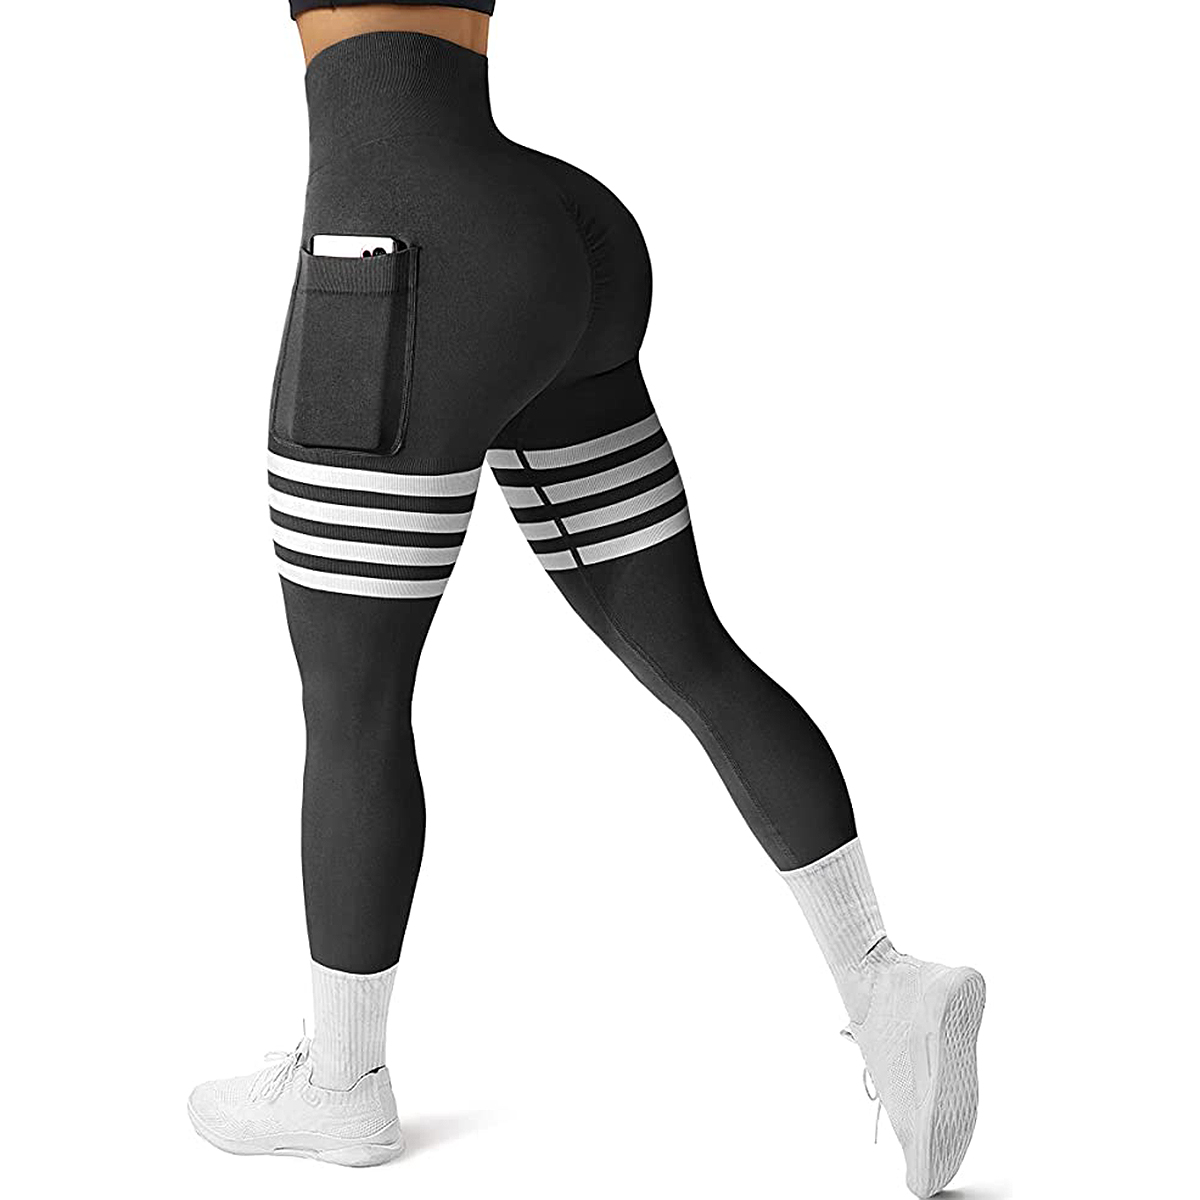 Womens Shapers Legs Slimming Body Shaper Anti Cellulite Compression Leggings  High Waist Tummy Control Panties Thigh Sculpting Slimmer Shapewear 230227  From Cong02, $10.15 | DHgate.Com